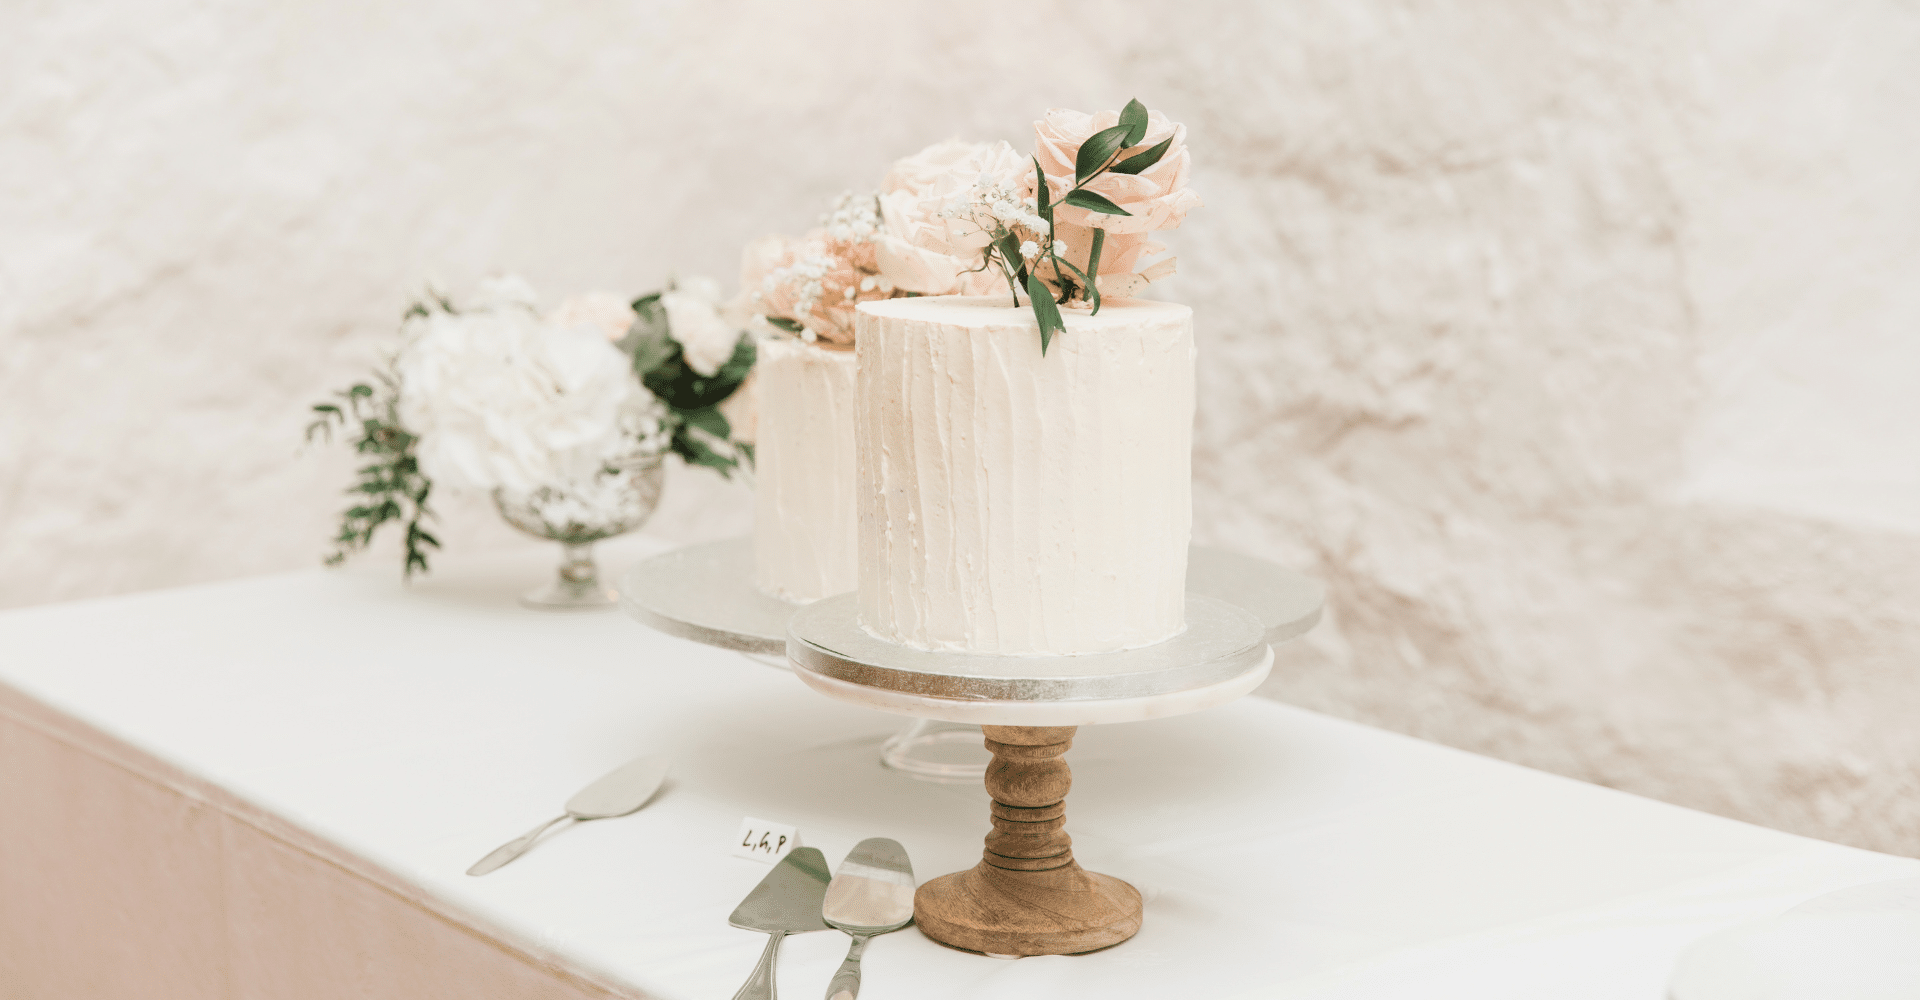 Blog | Unexpected Wedding Cakes We Love To See On A Dessert Table!